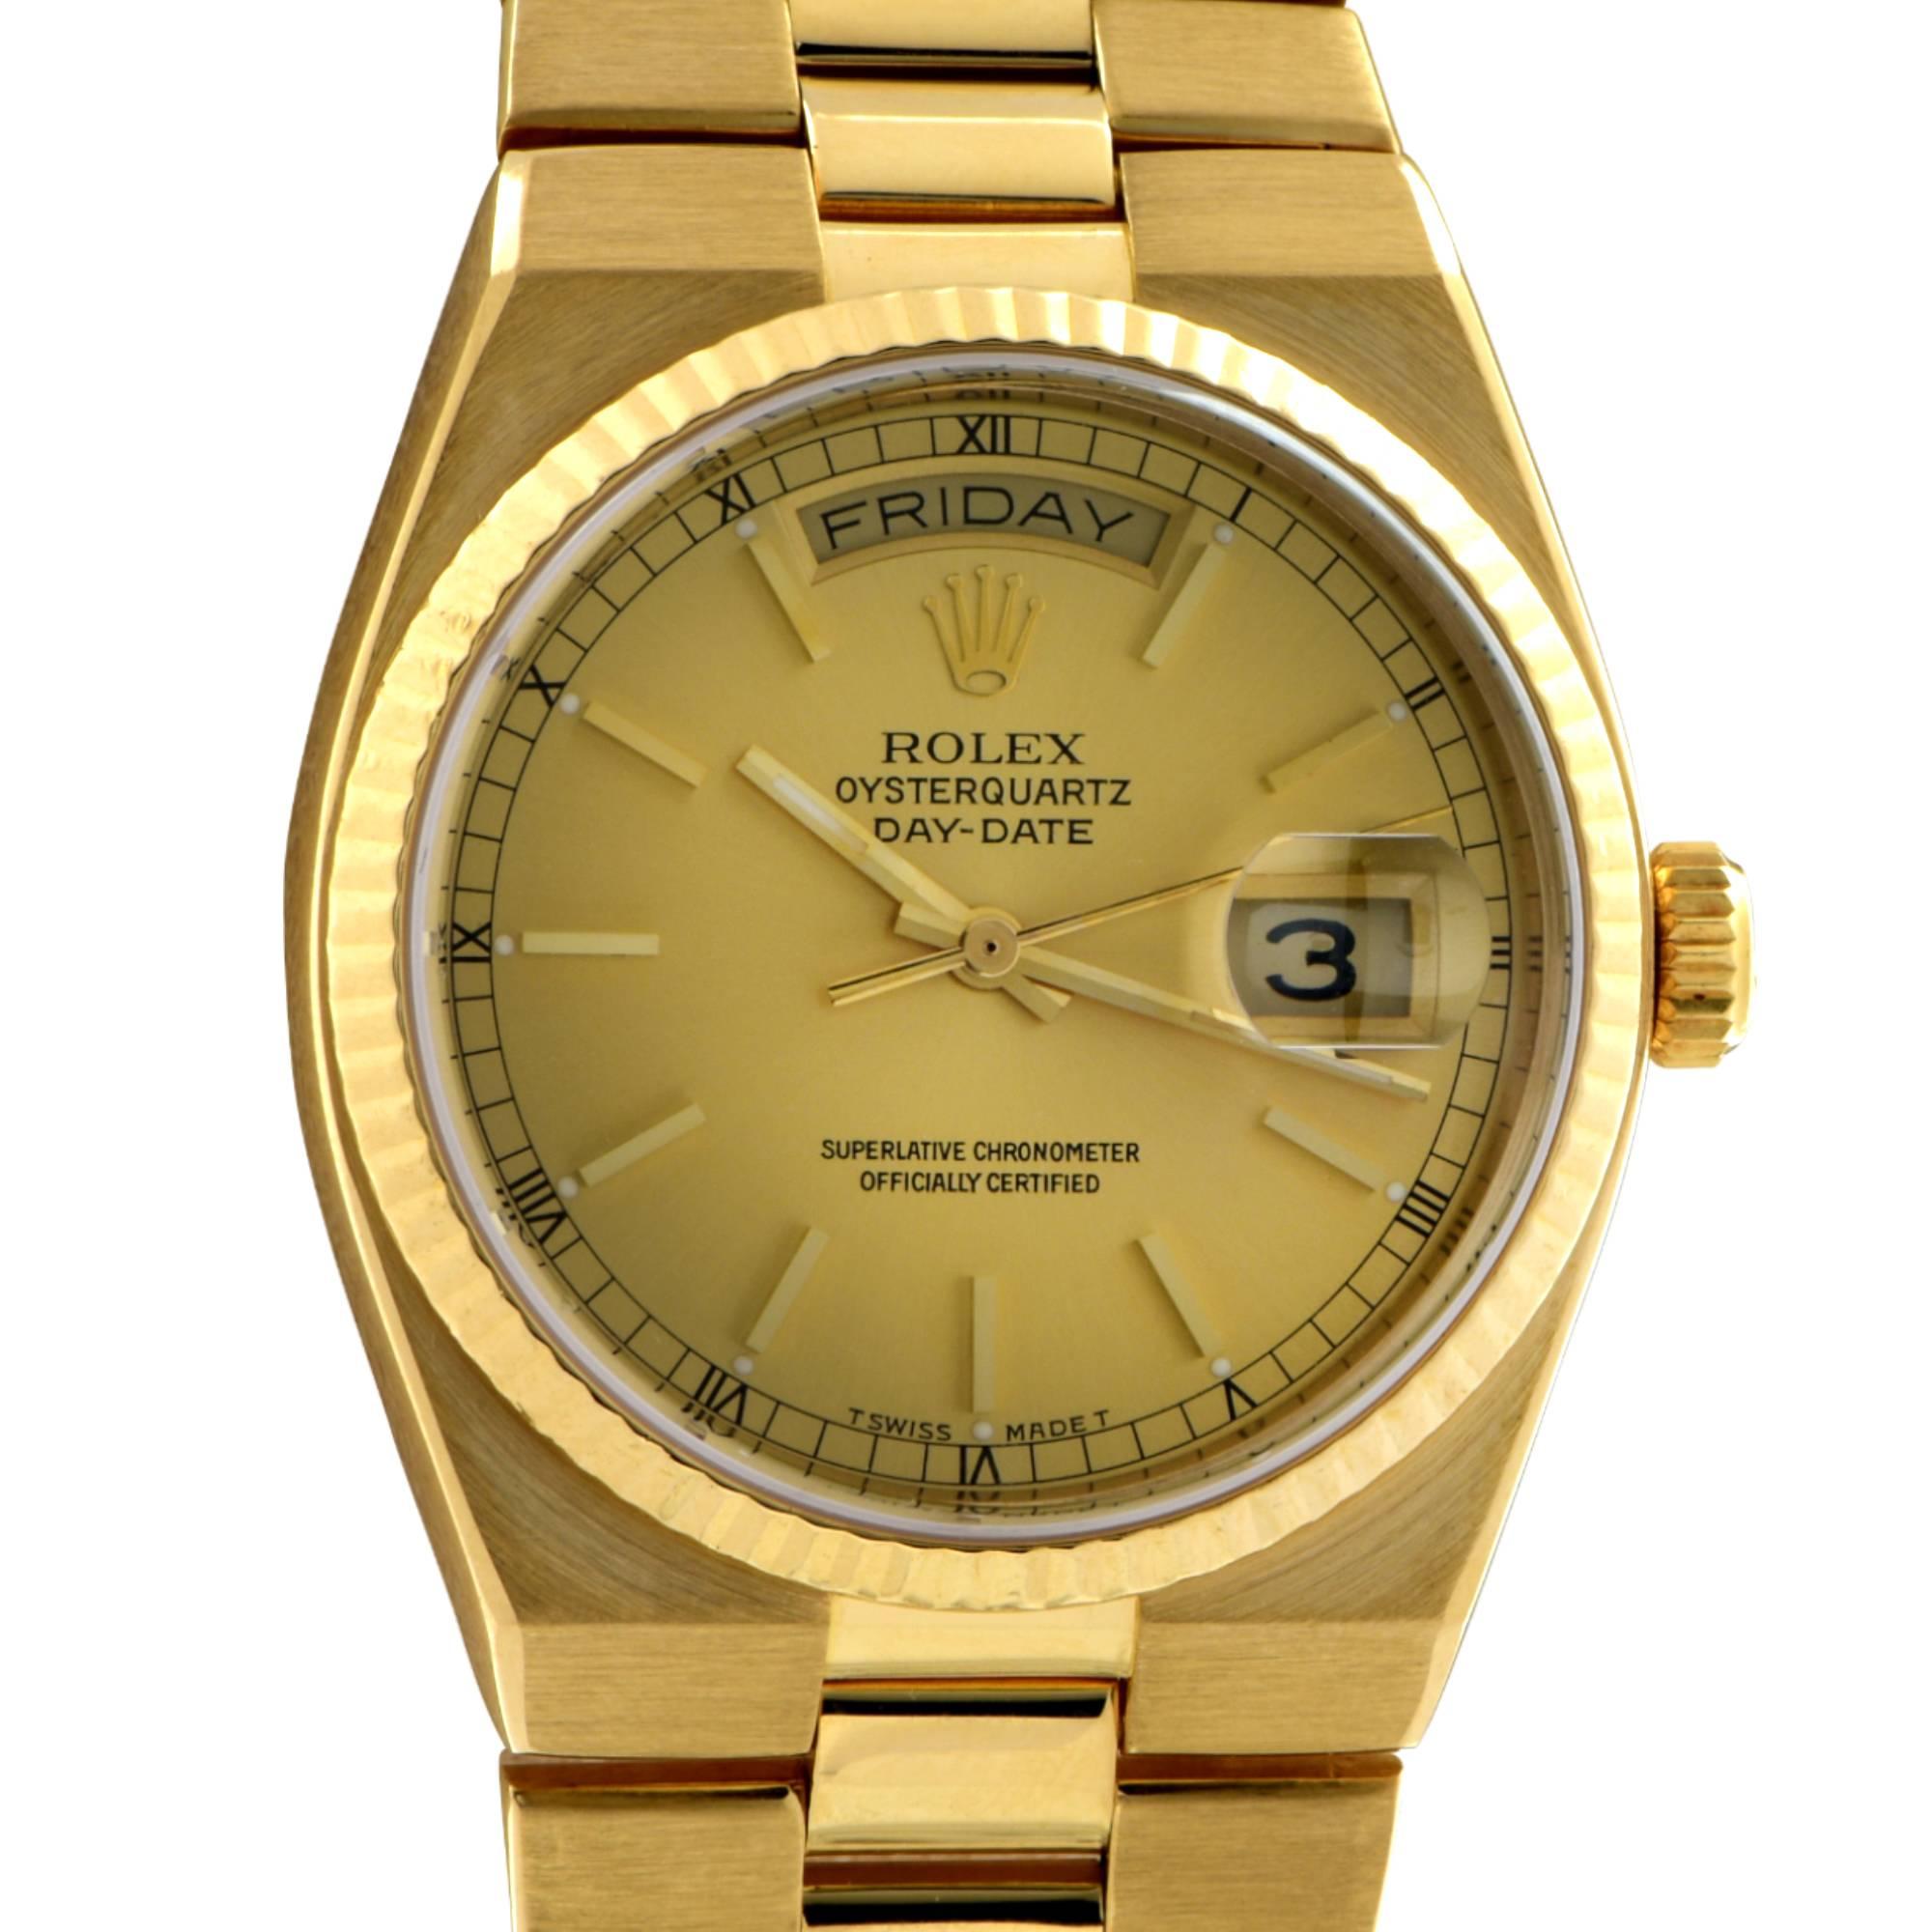 Rolex Oysterquartz Day-Date (19018), Circa 1979, quartz watch, features a 36mm 18k yellow gold case and bracelet with fluted bezel surrounding a gold dial. Functions include hours, minutes, seconds, day and date. Rolex, a true house hold name that